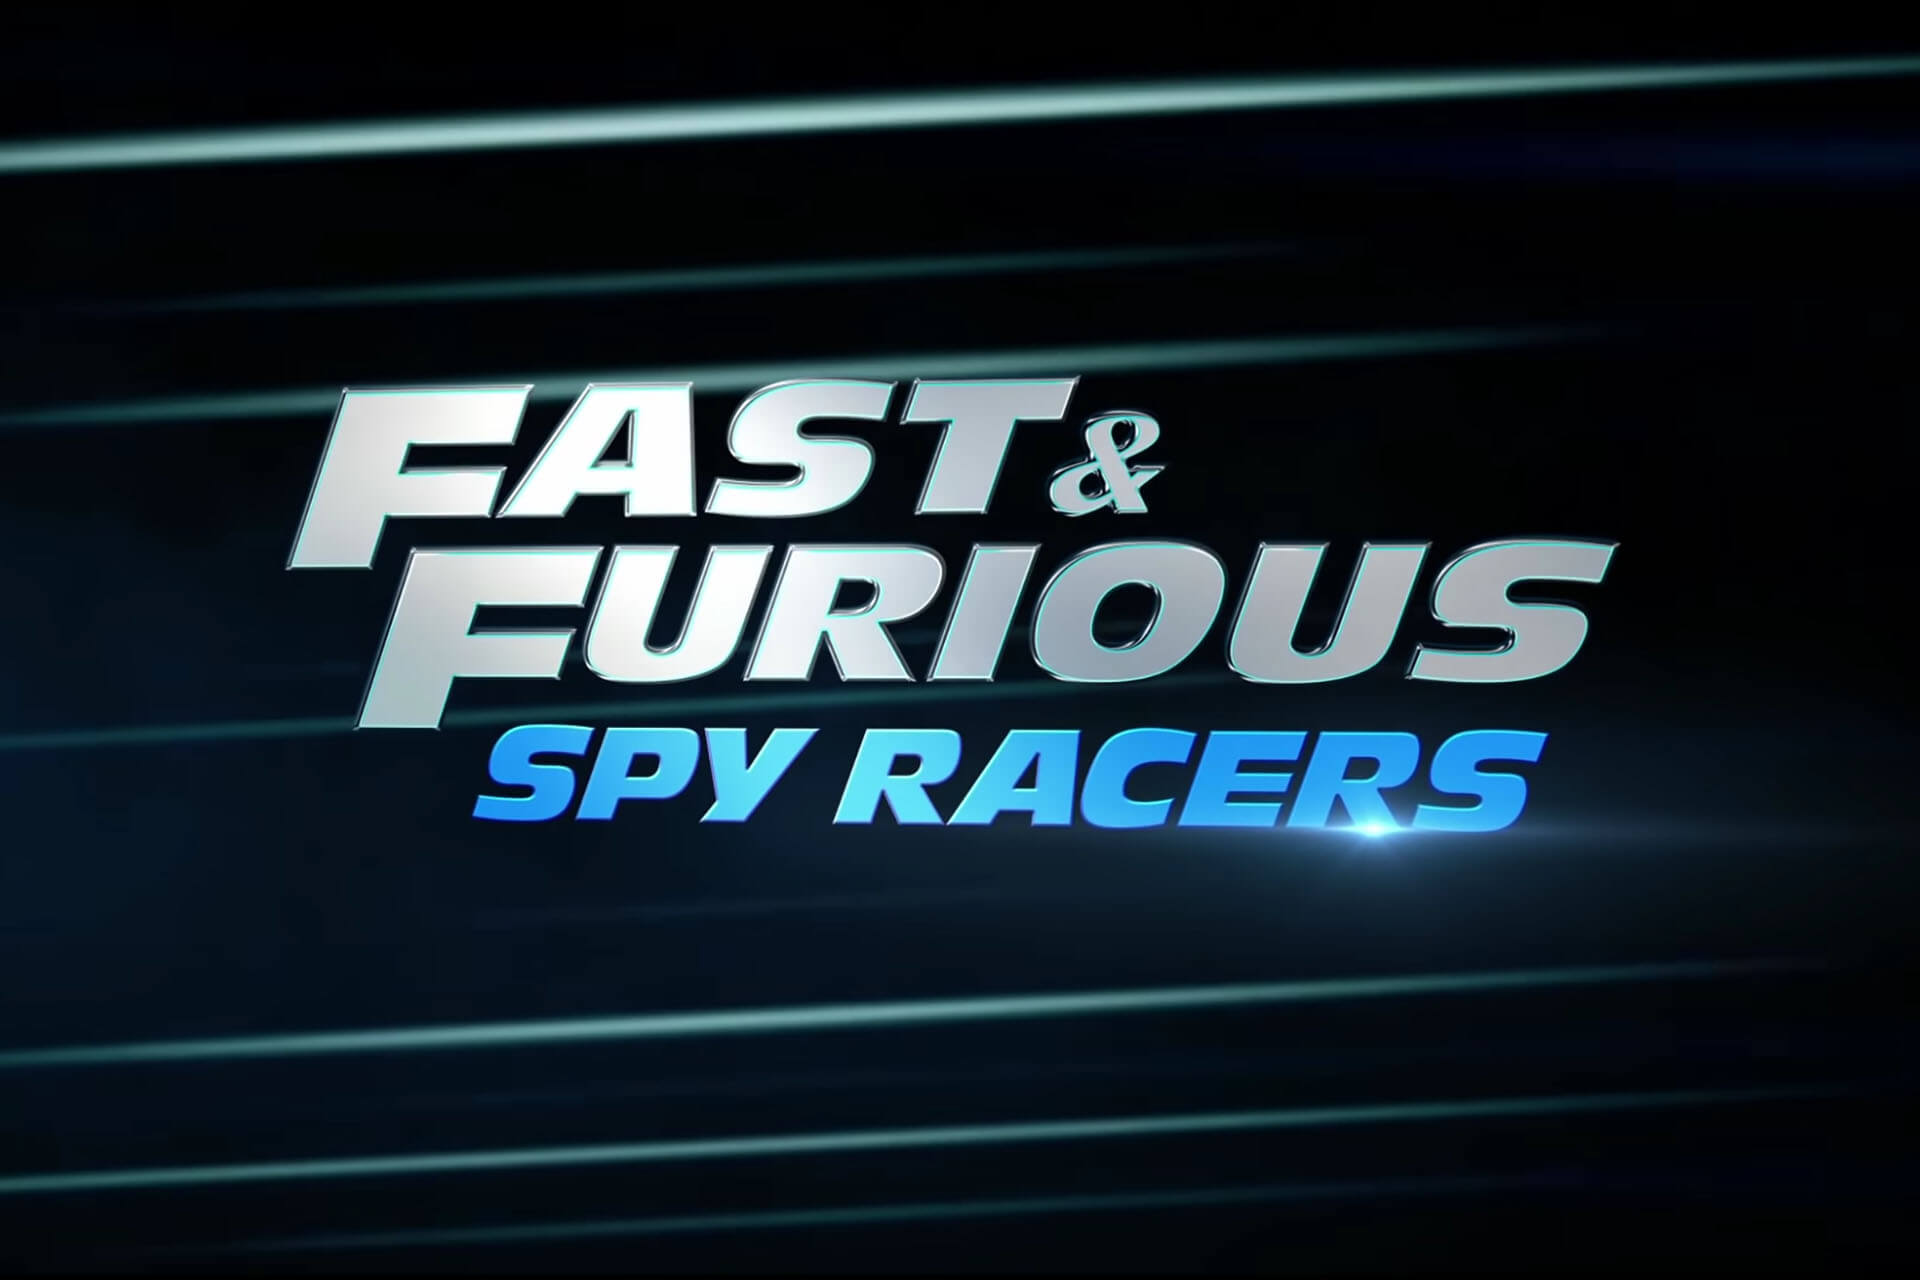 New pics for Fast and Furious Spy Racers series